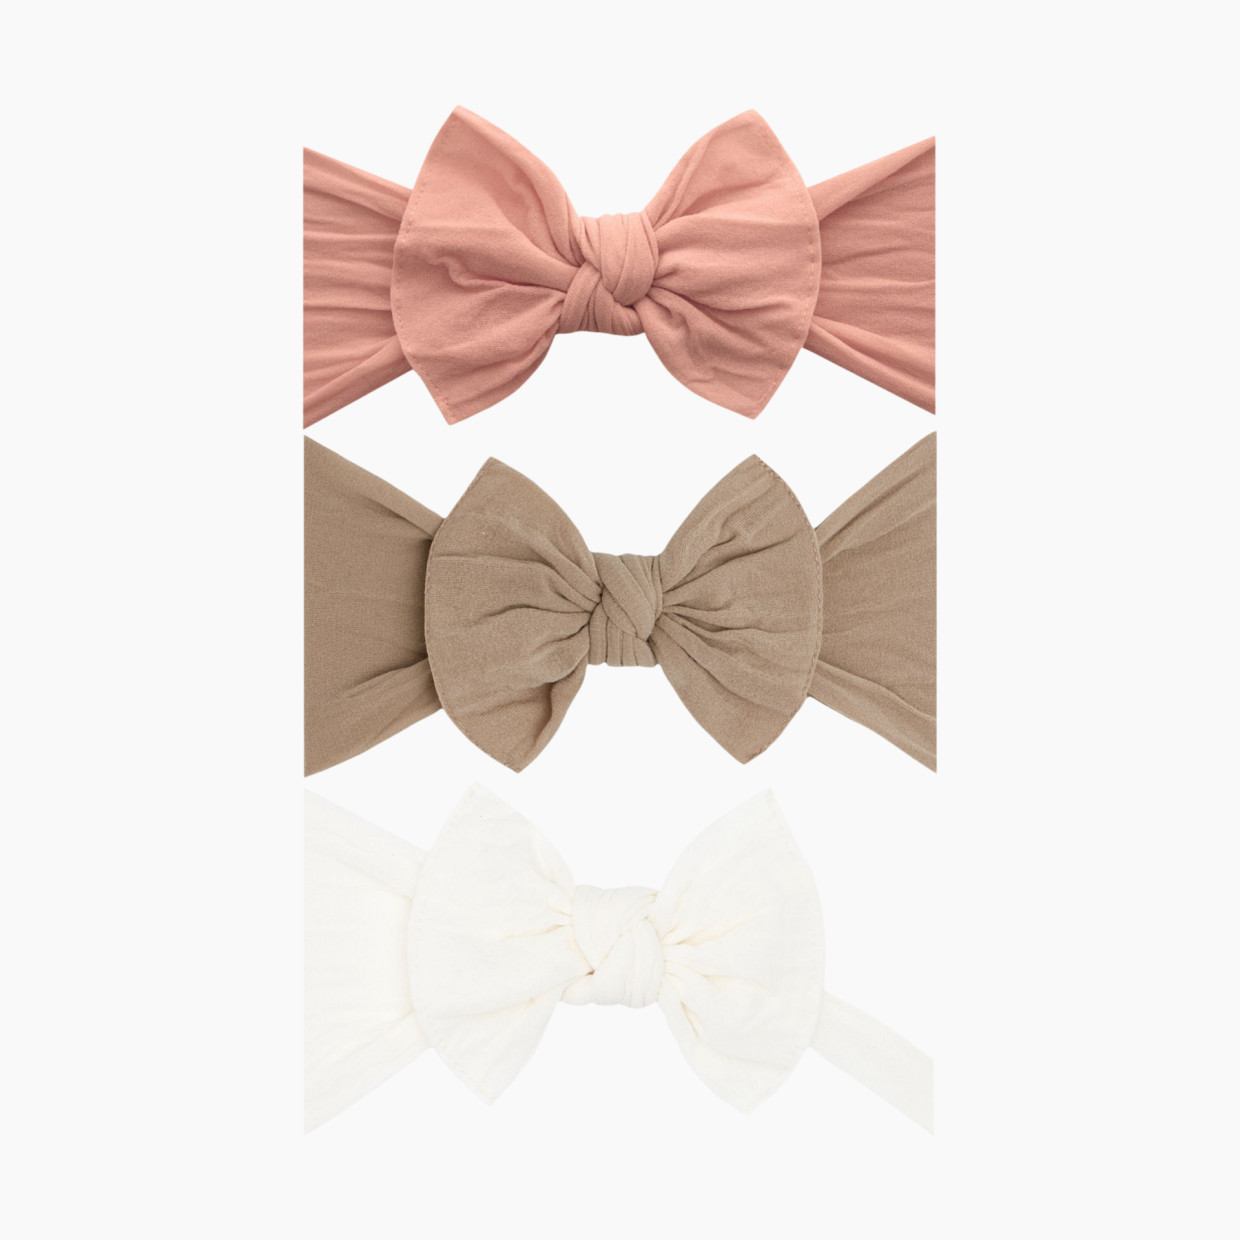 Baby Bling Classic Knot Headband Set (3 pack) - Rose Gold, Oak, And Ivory.